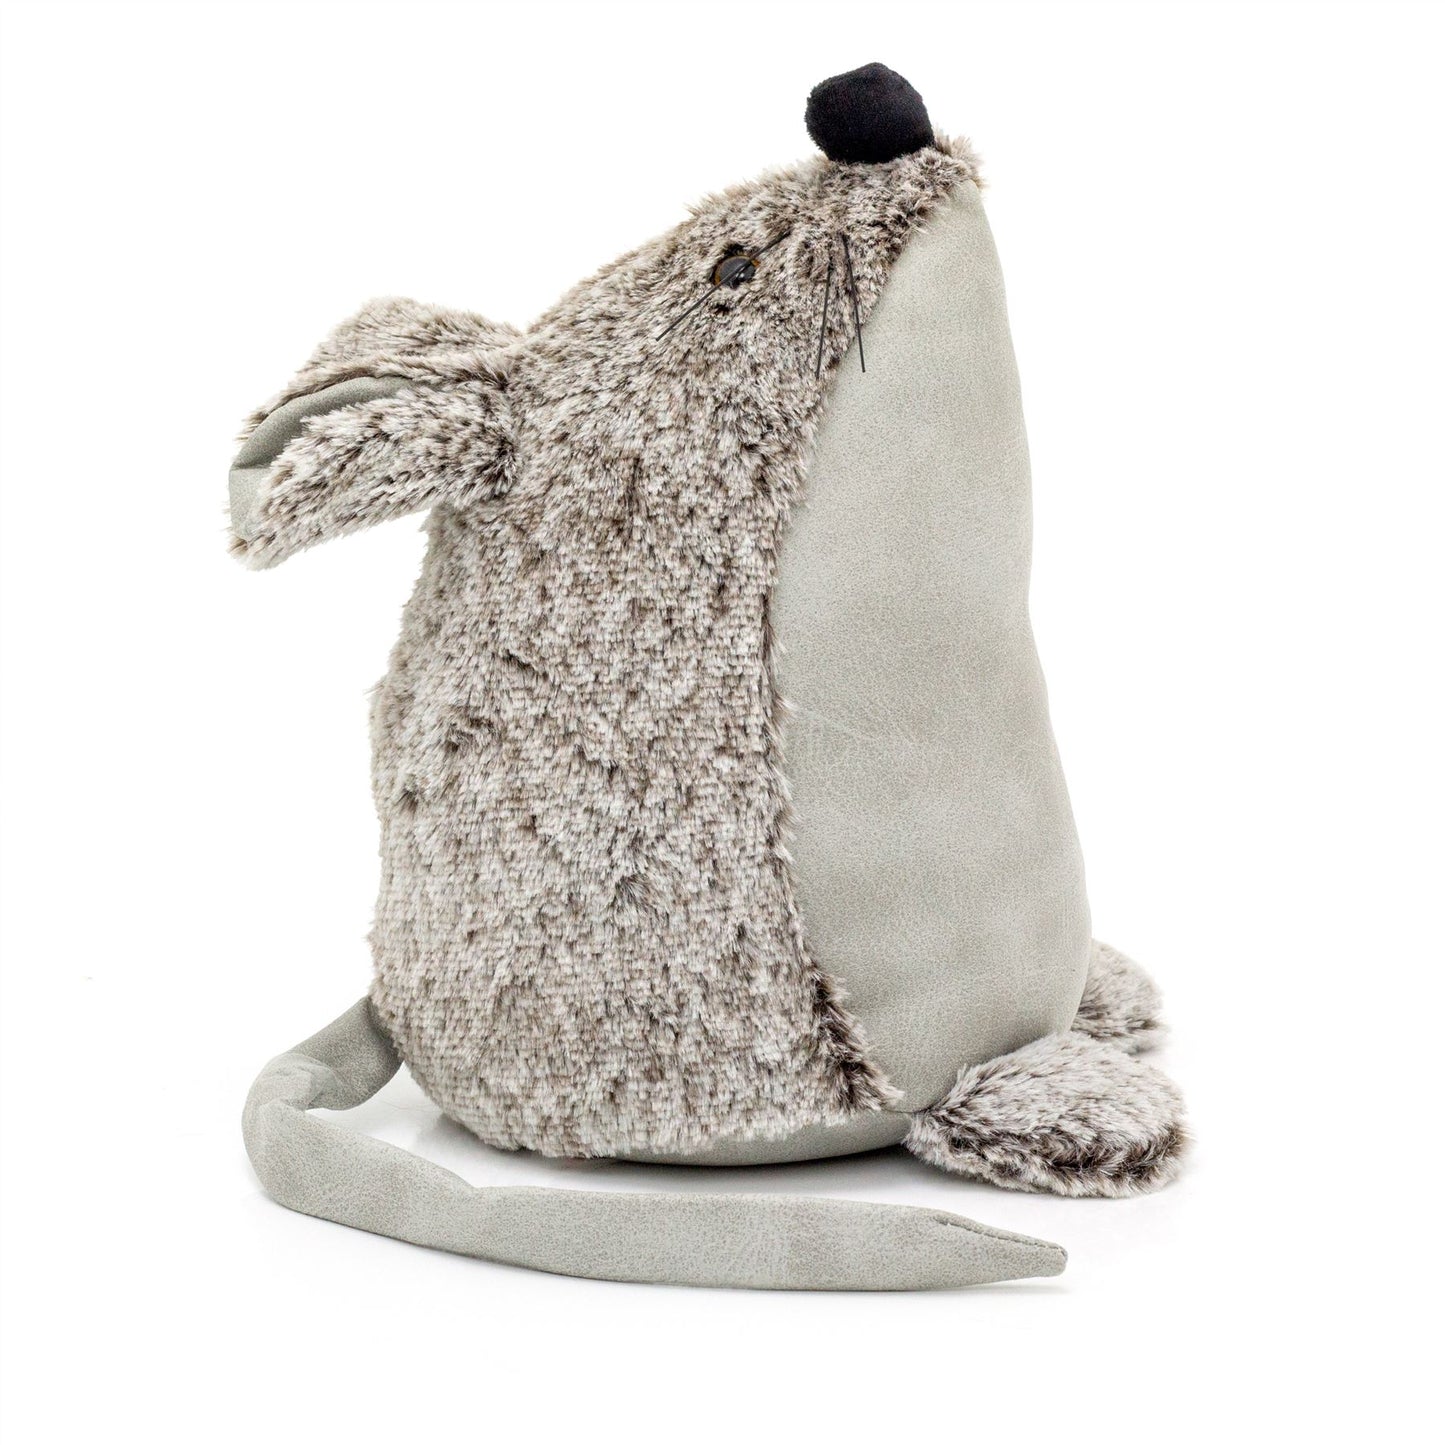 Bella Mouse Doorstop | Faux Leather Weighted Grey Mouse Animal Door Stop 1.8kg